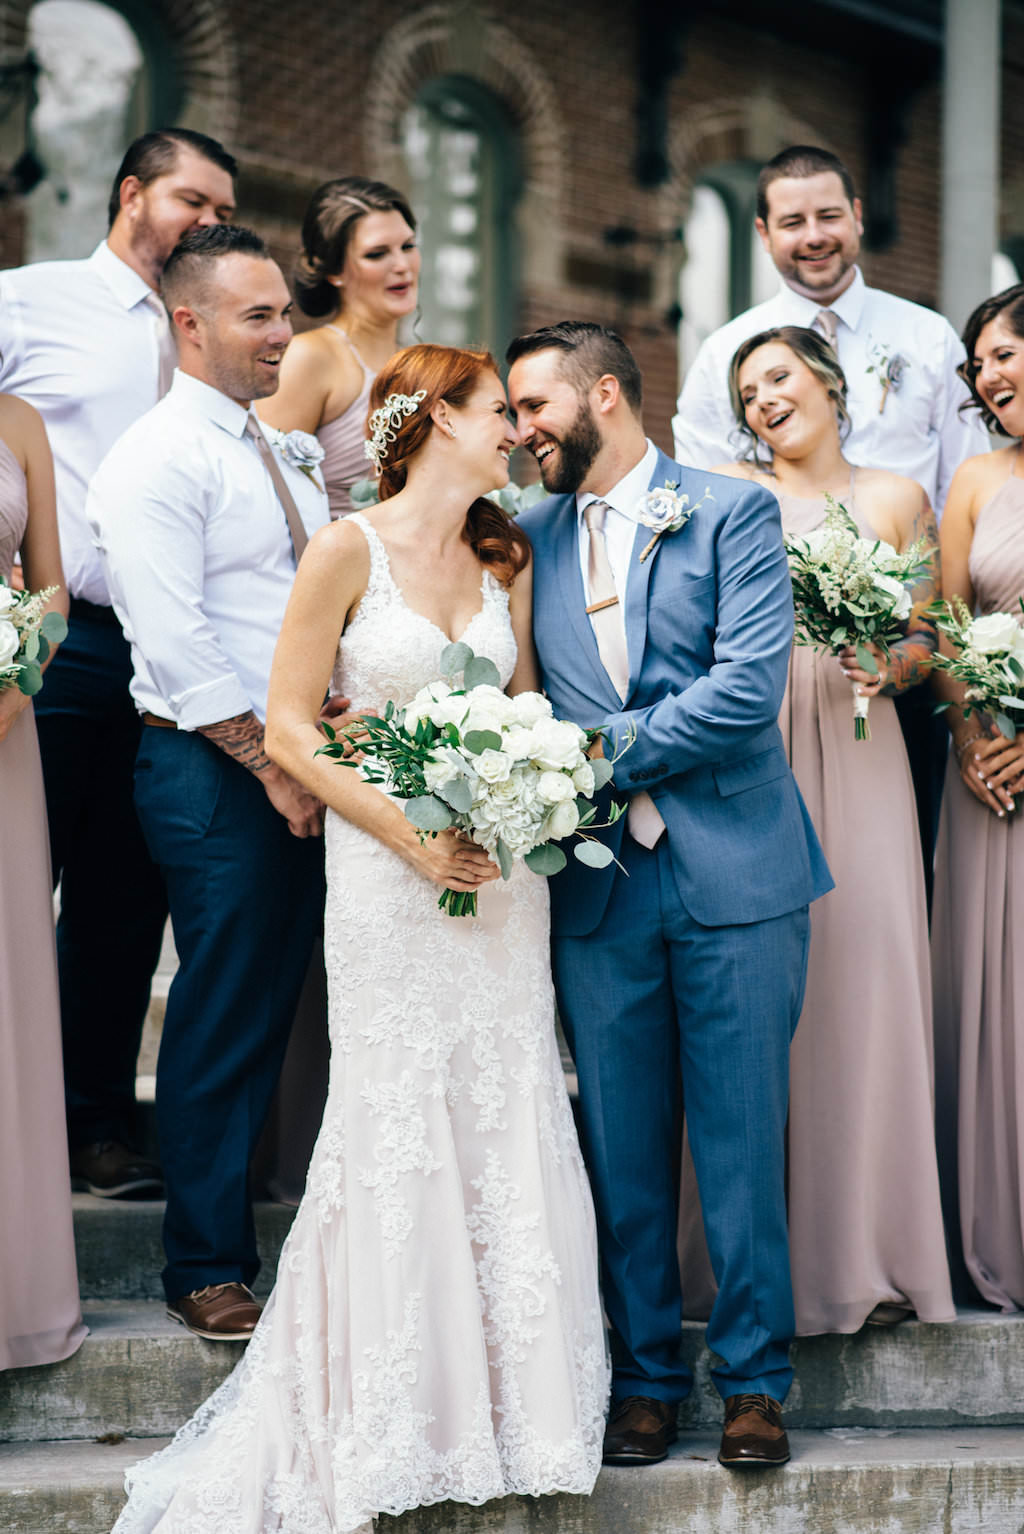 Downtown Tampa Outdoor Wedding Party Portrait with Historic Architecture, Bridesmaids in Taupe Floorlength Azazie Dresses, Groom in Blue Suit, Groomsmen in White Shirts with Taupe Ties